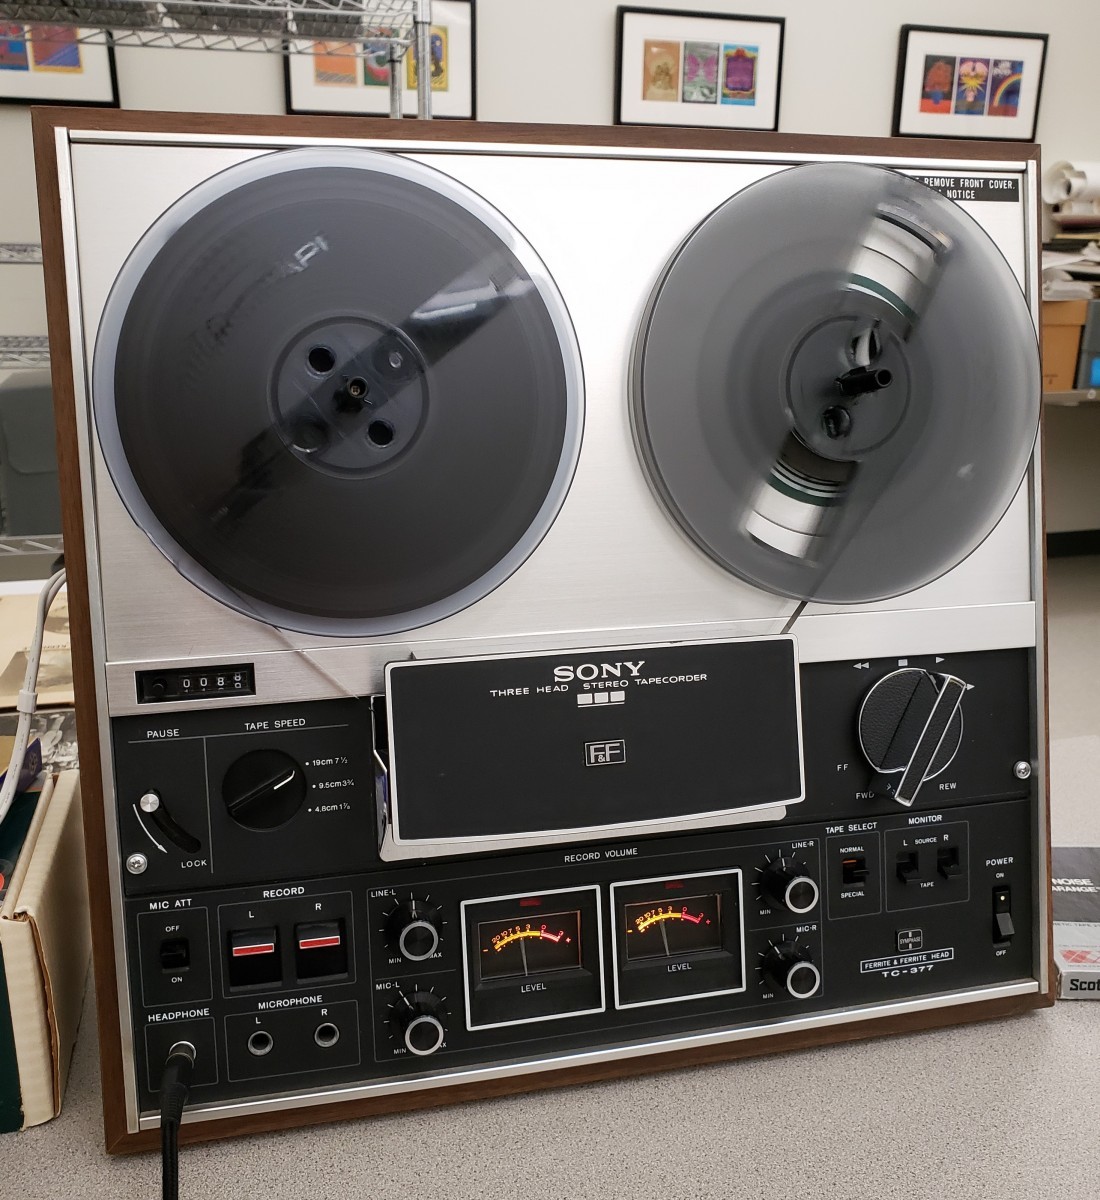 Reel-to-reel deck used to digitize  the Convention audio reels